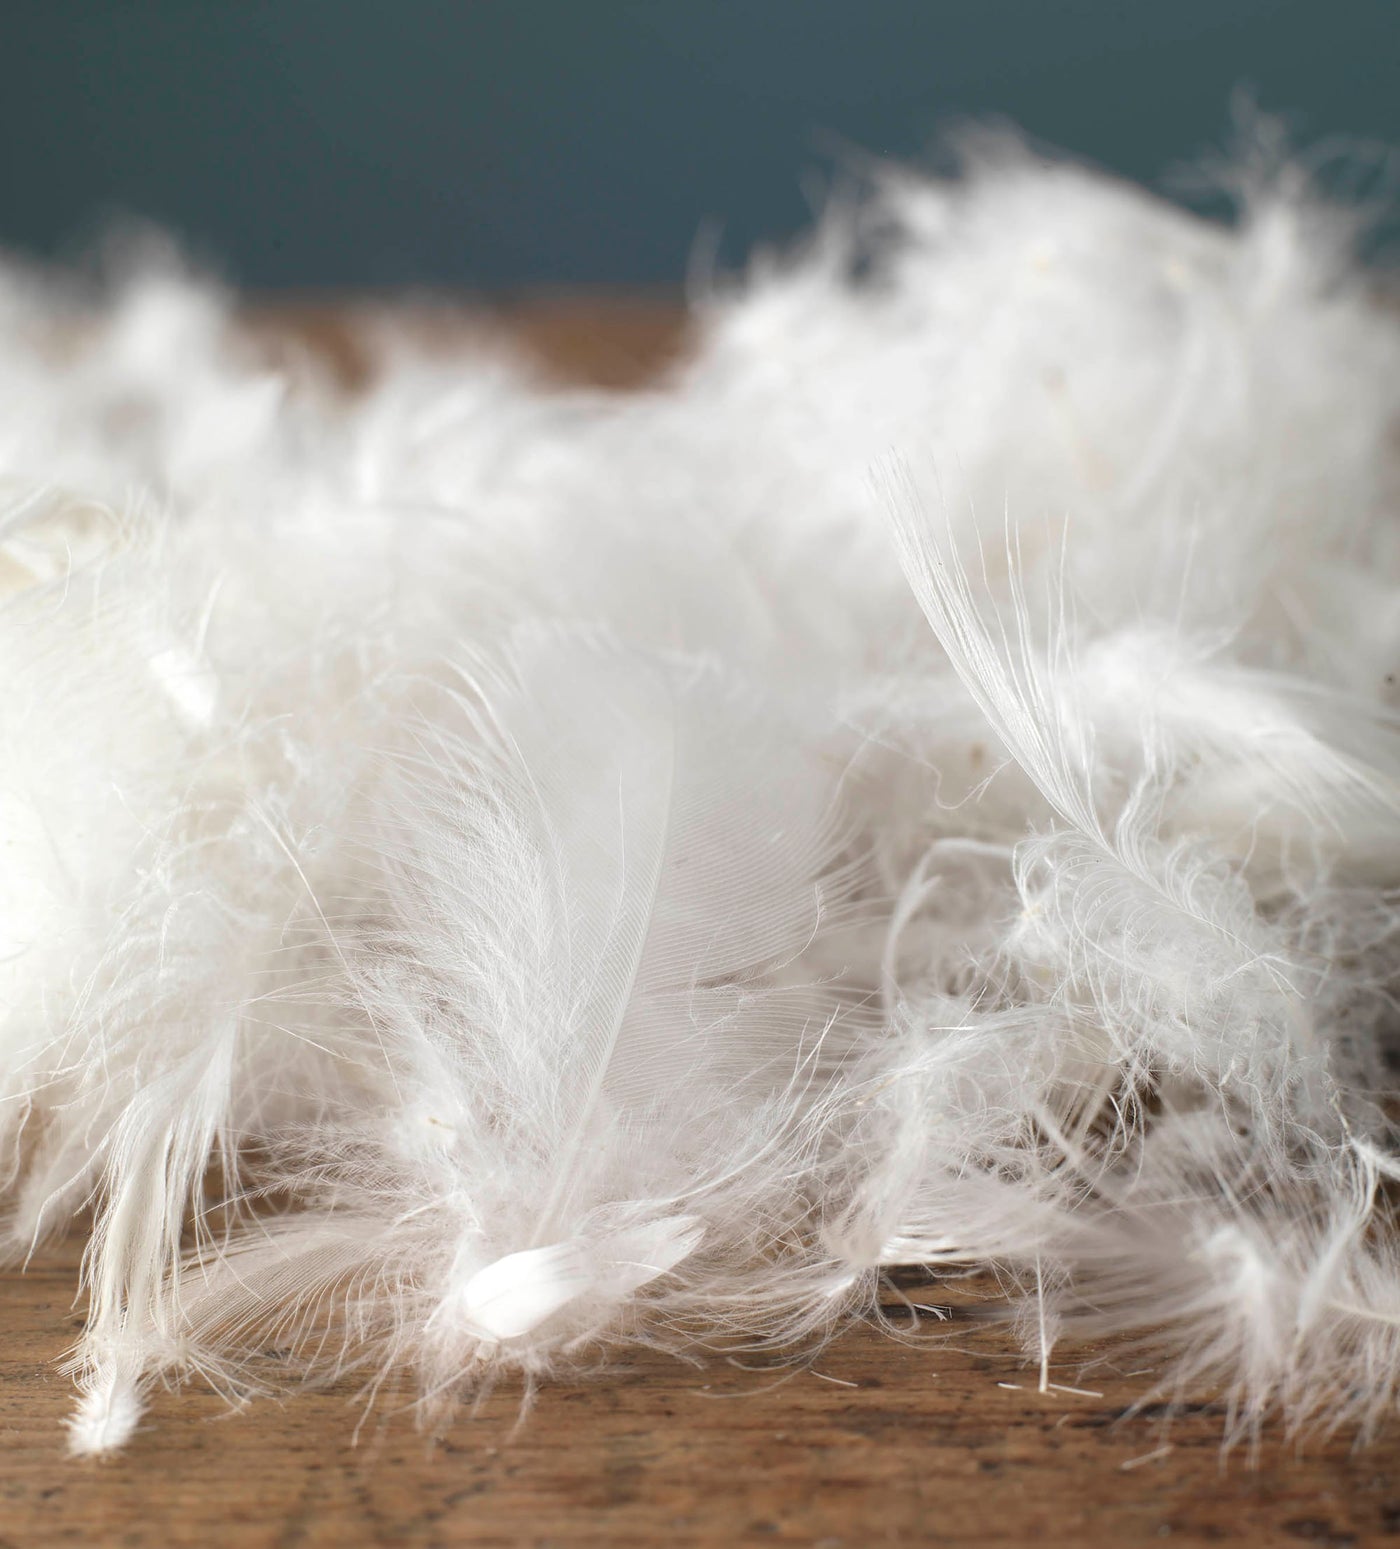 Hungarian Goose Feather and Down Pillows